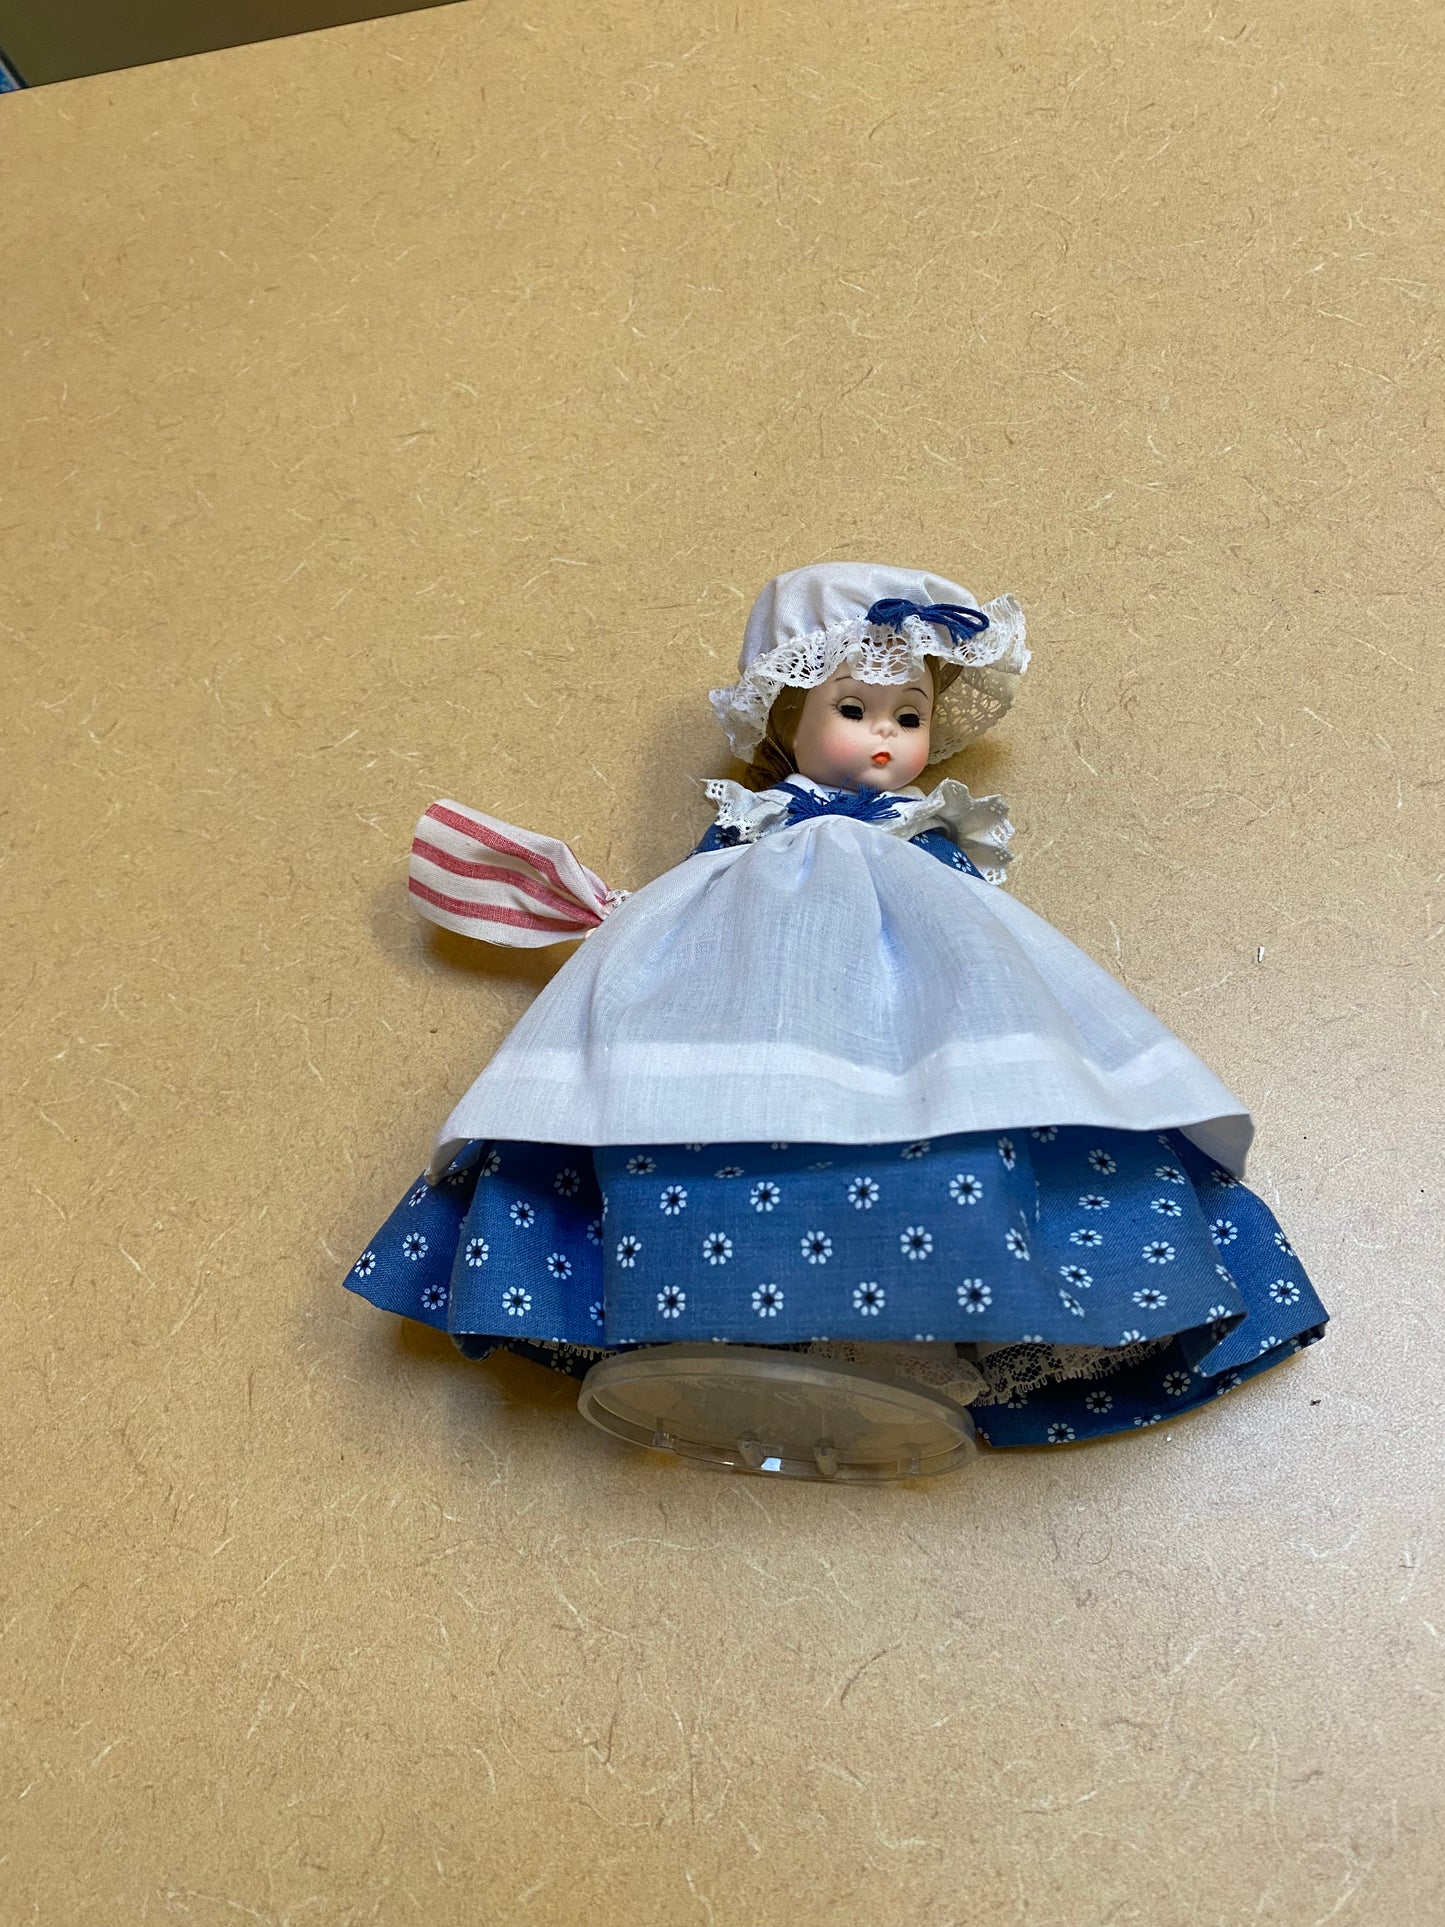 Madame Alexander's "Betsy Ross" Doll